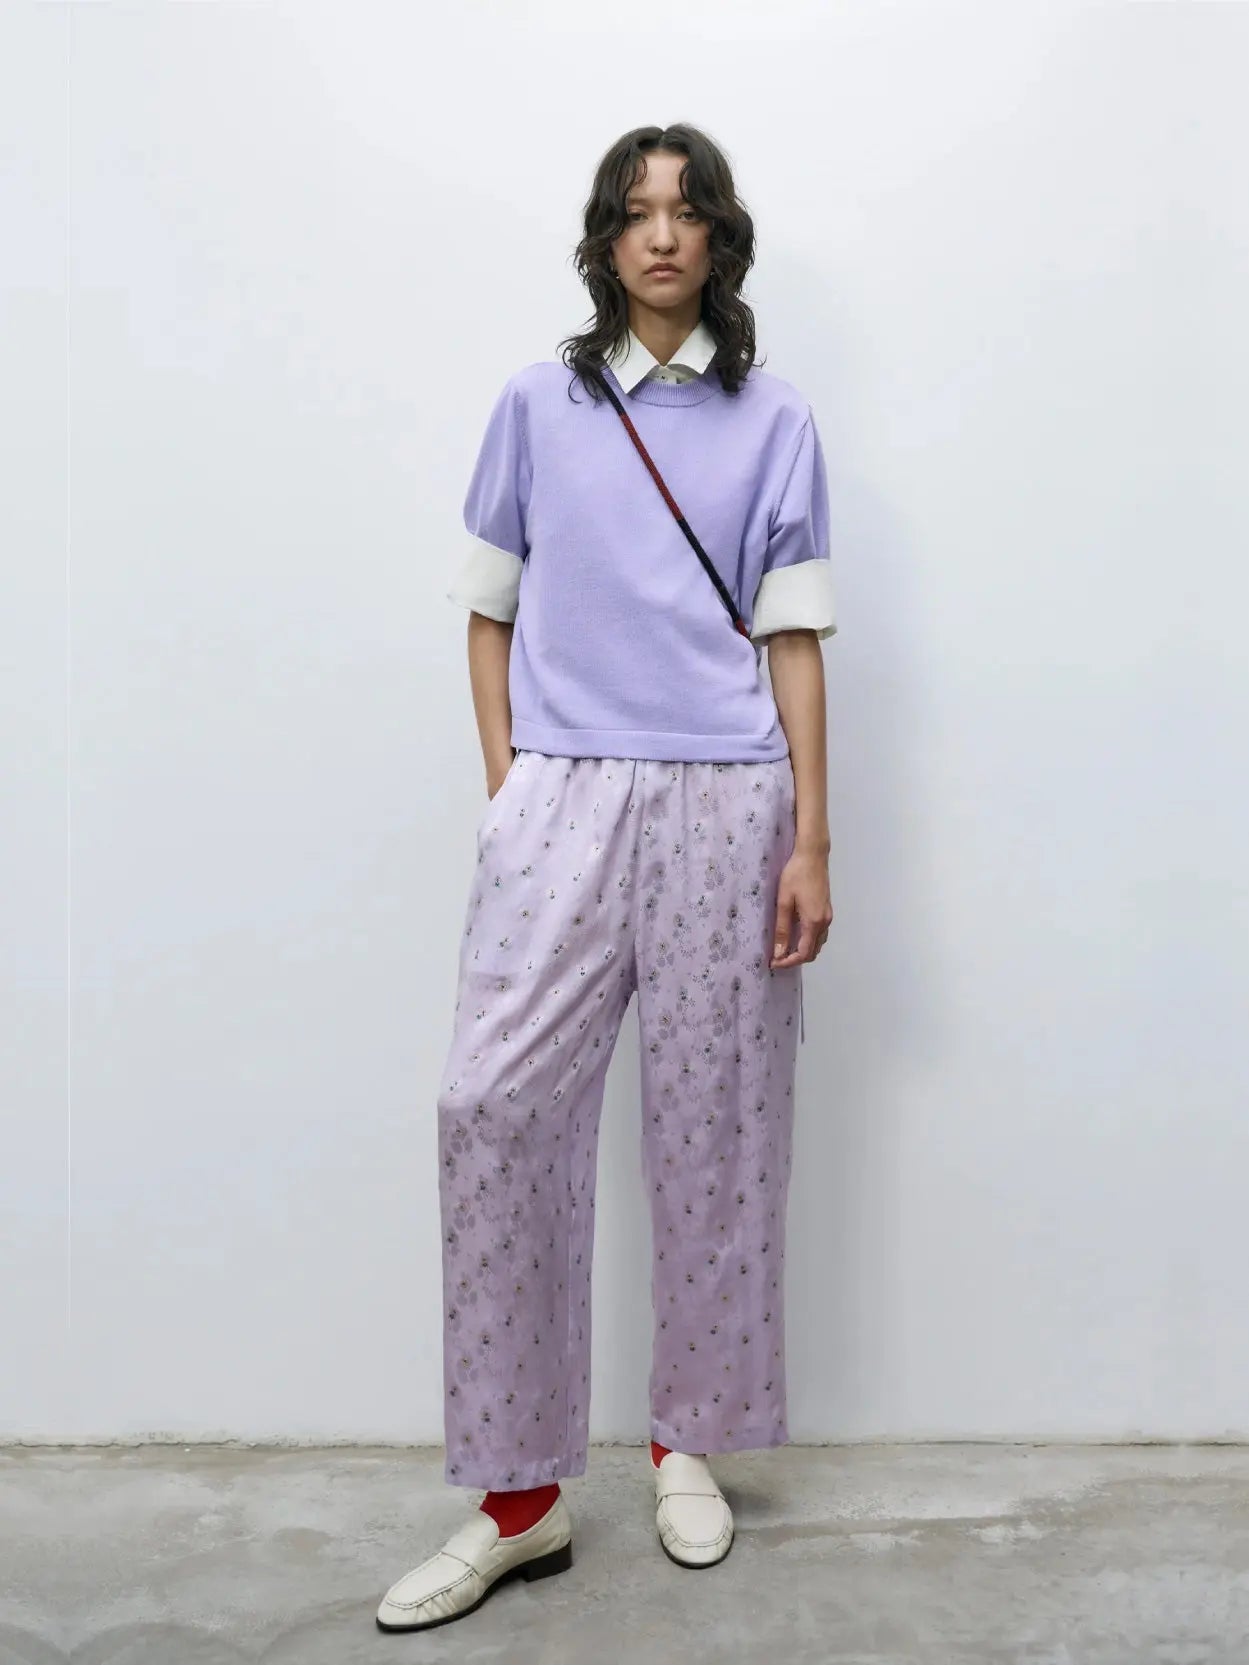 A person stands against a plain white background. They are dressed in a light purple, short-sleeve sweater over a white shirt, Silk Floral Pants Cardo from Cordera, white shoes, and red socks. A small crossbody bag from bassalstore in Barcelona is slung over their shoulder.